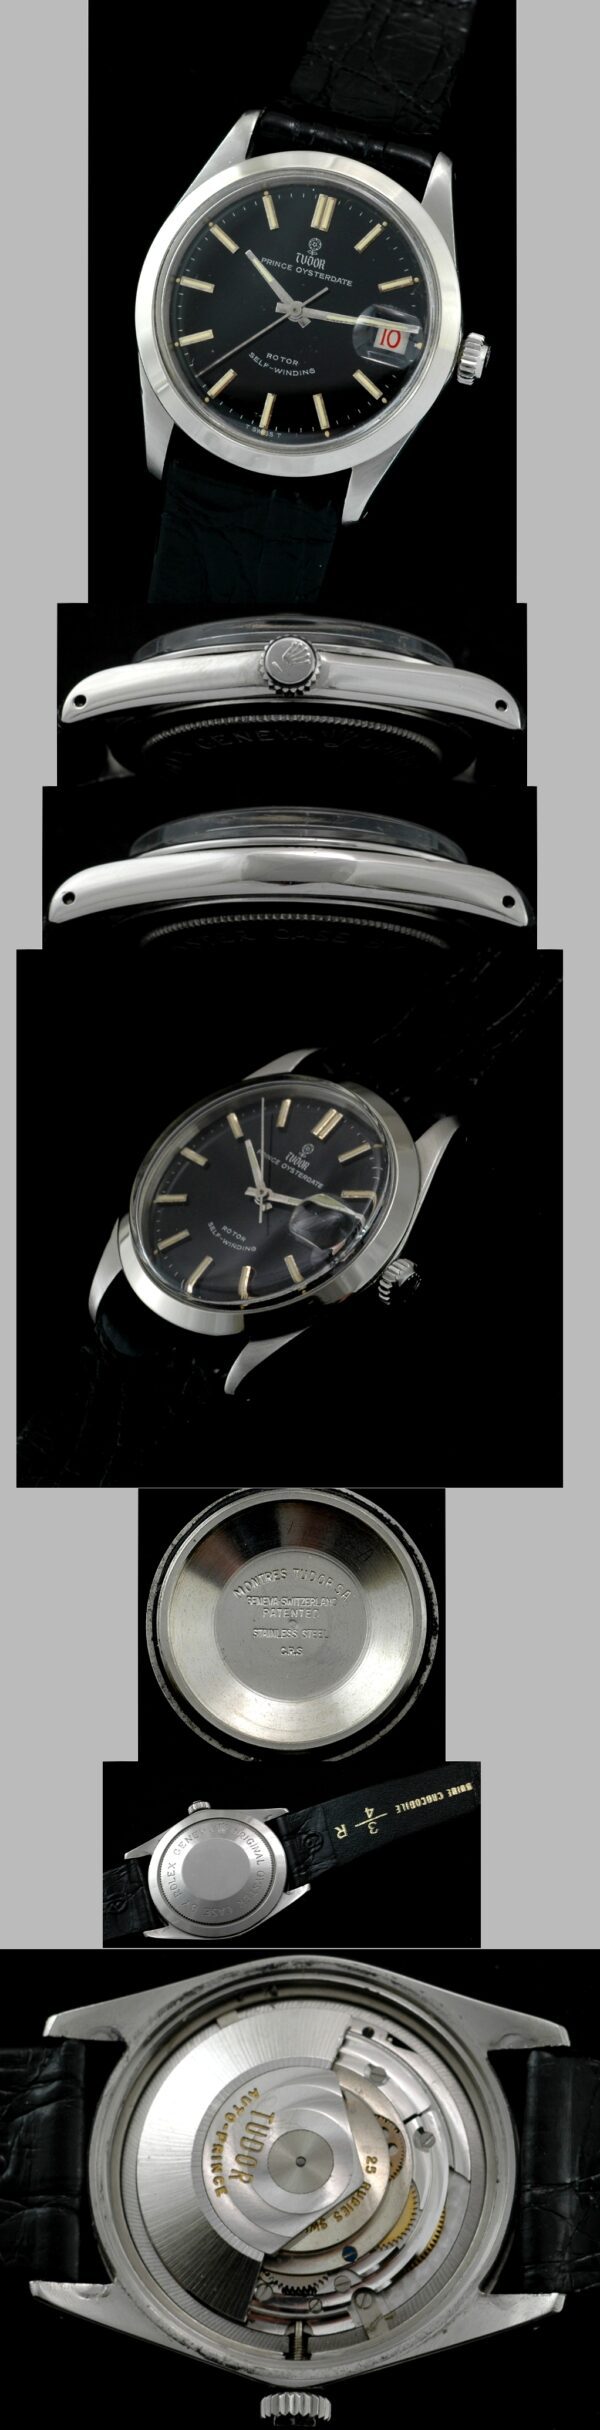 1960 Tudor Prince Oysterdate stainless steel watch with original Rolex case back, glossy black dial, rose insignia, and baton markers.